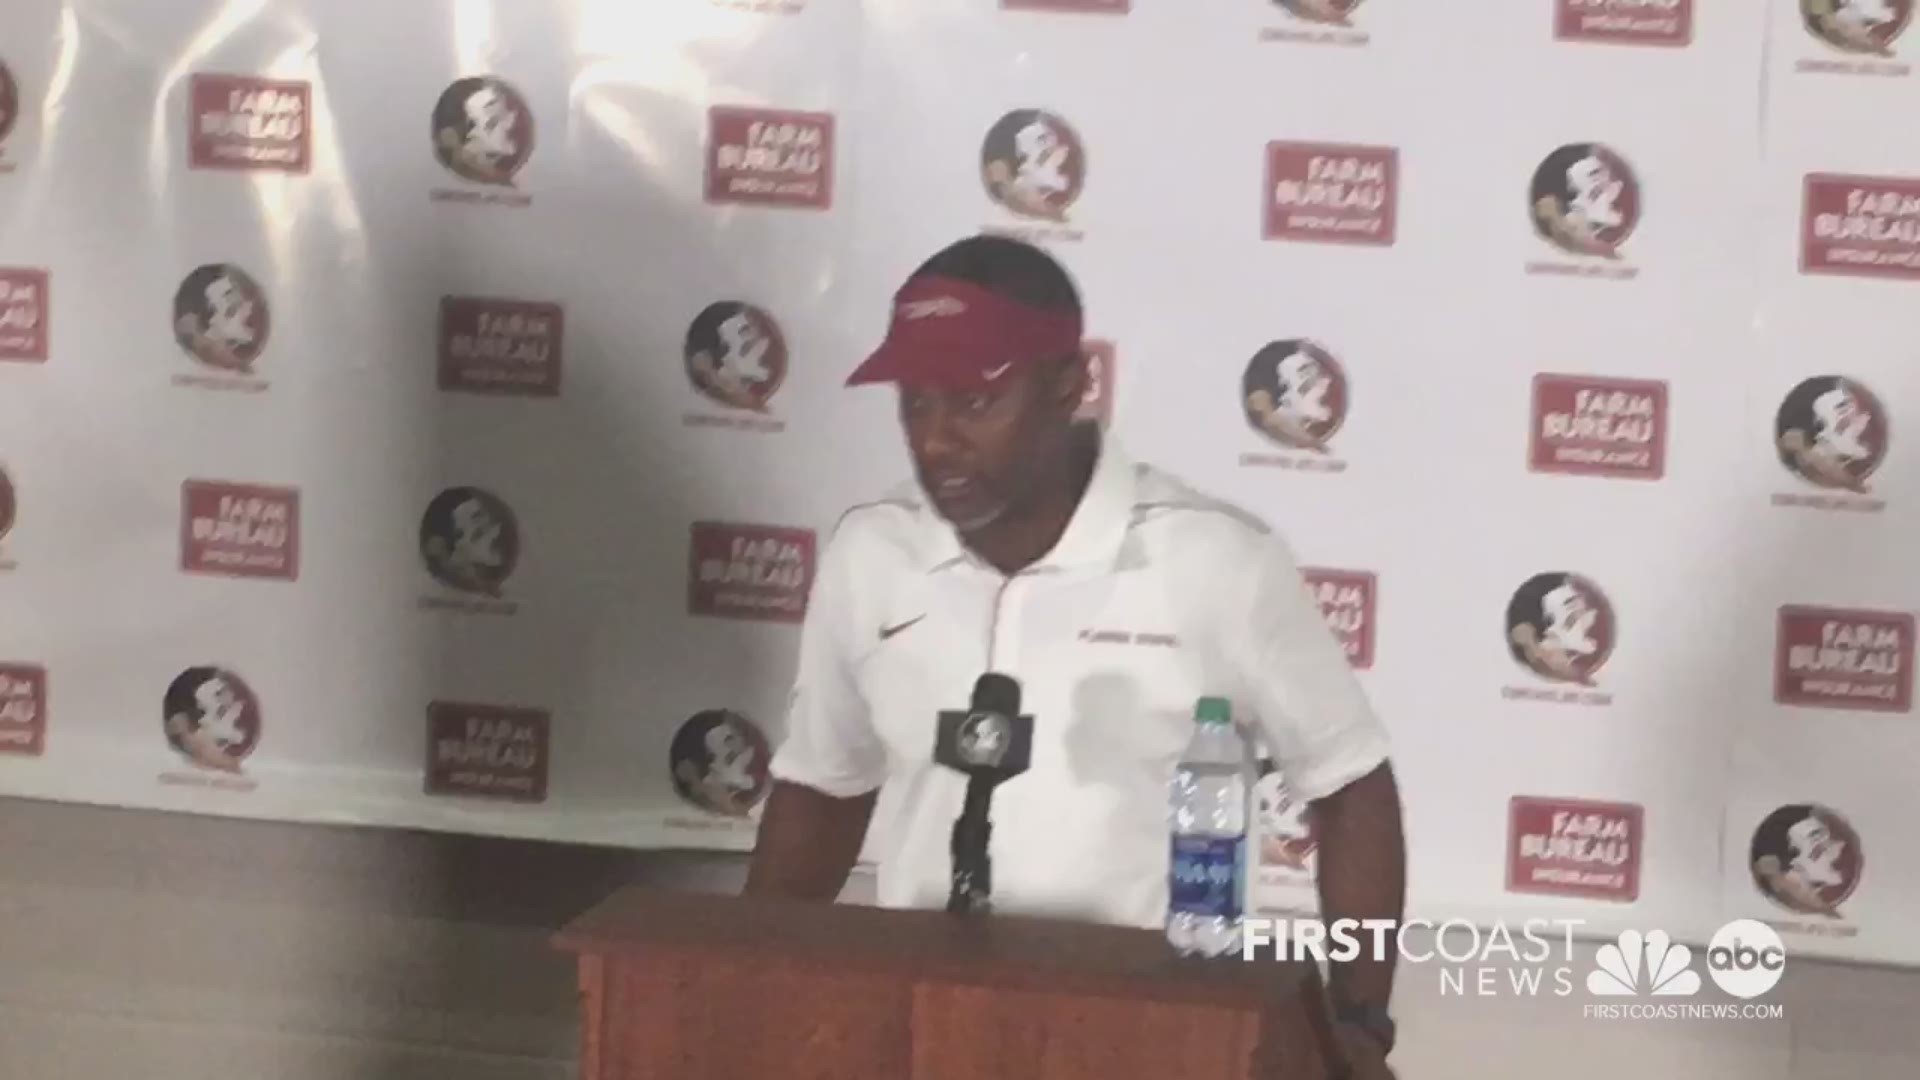 Noles head coach reacts after Boise State?s comeback win over Florida State